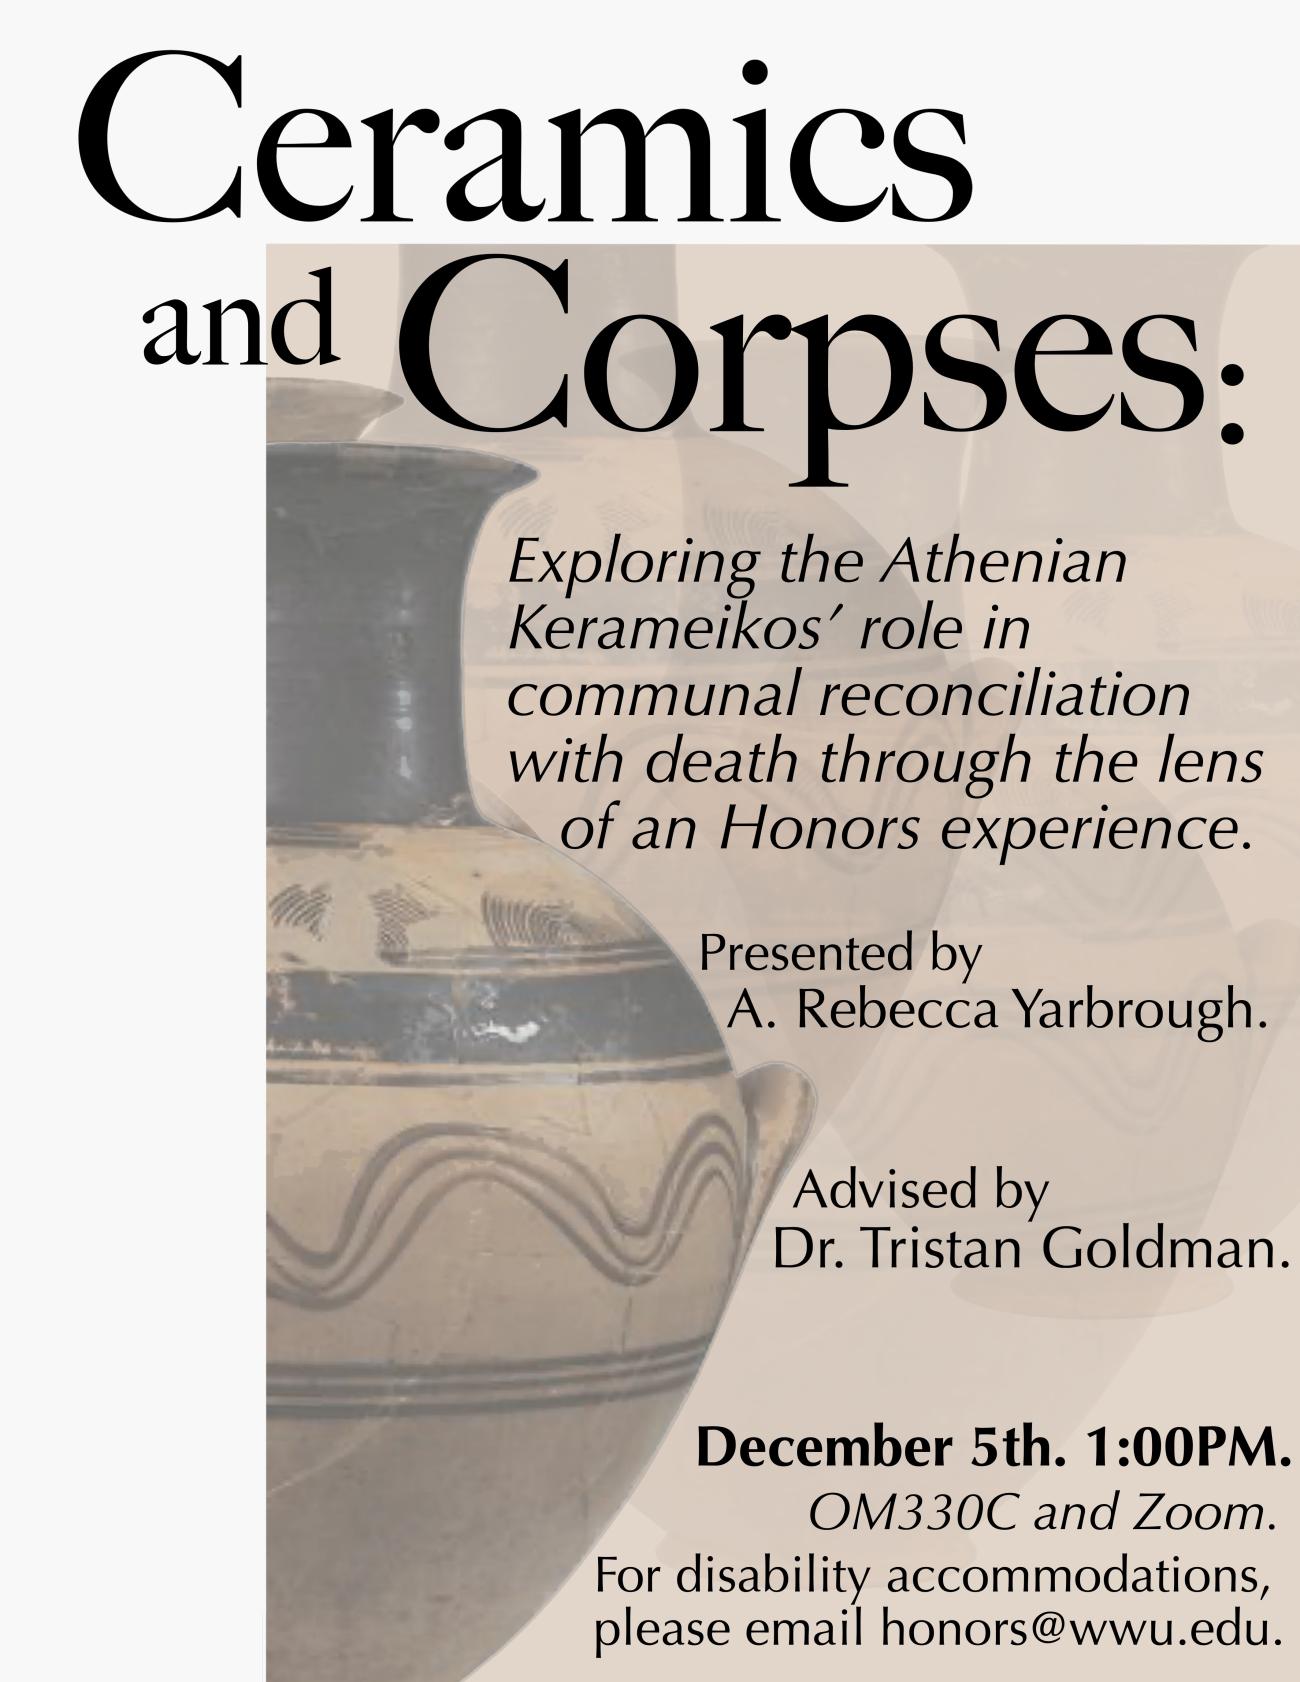 Iterative images of an amphora on a clay-colored background. Text reads “Ceramics and Corpses: Exploring the Athenian Kerameikos’ role in communal reconciliation with death through the lens of an Honors experience. Presented by A. Rebecca Yarbrough. Advised by Dr. Tristan Goldman. December 5th. 1:00PM. OM330C and Zoom. For disability accommodations, please email honors@wwu.edu.”